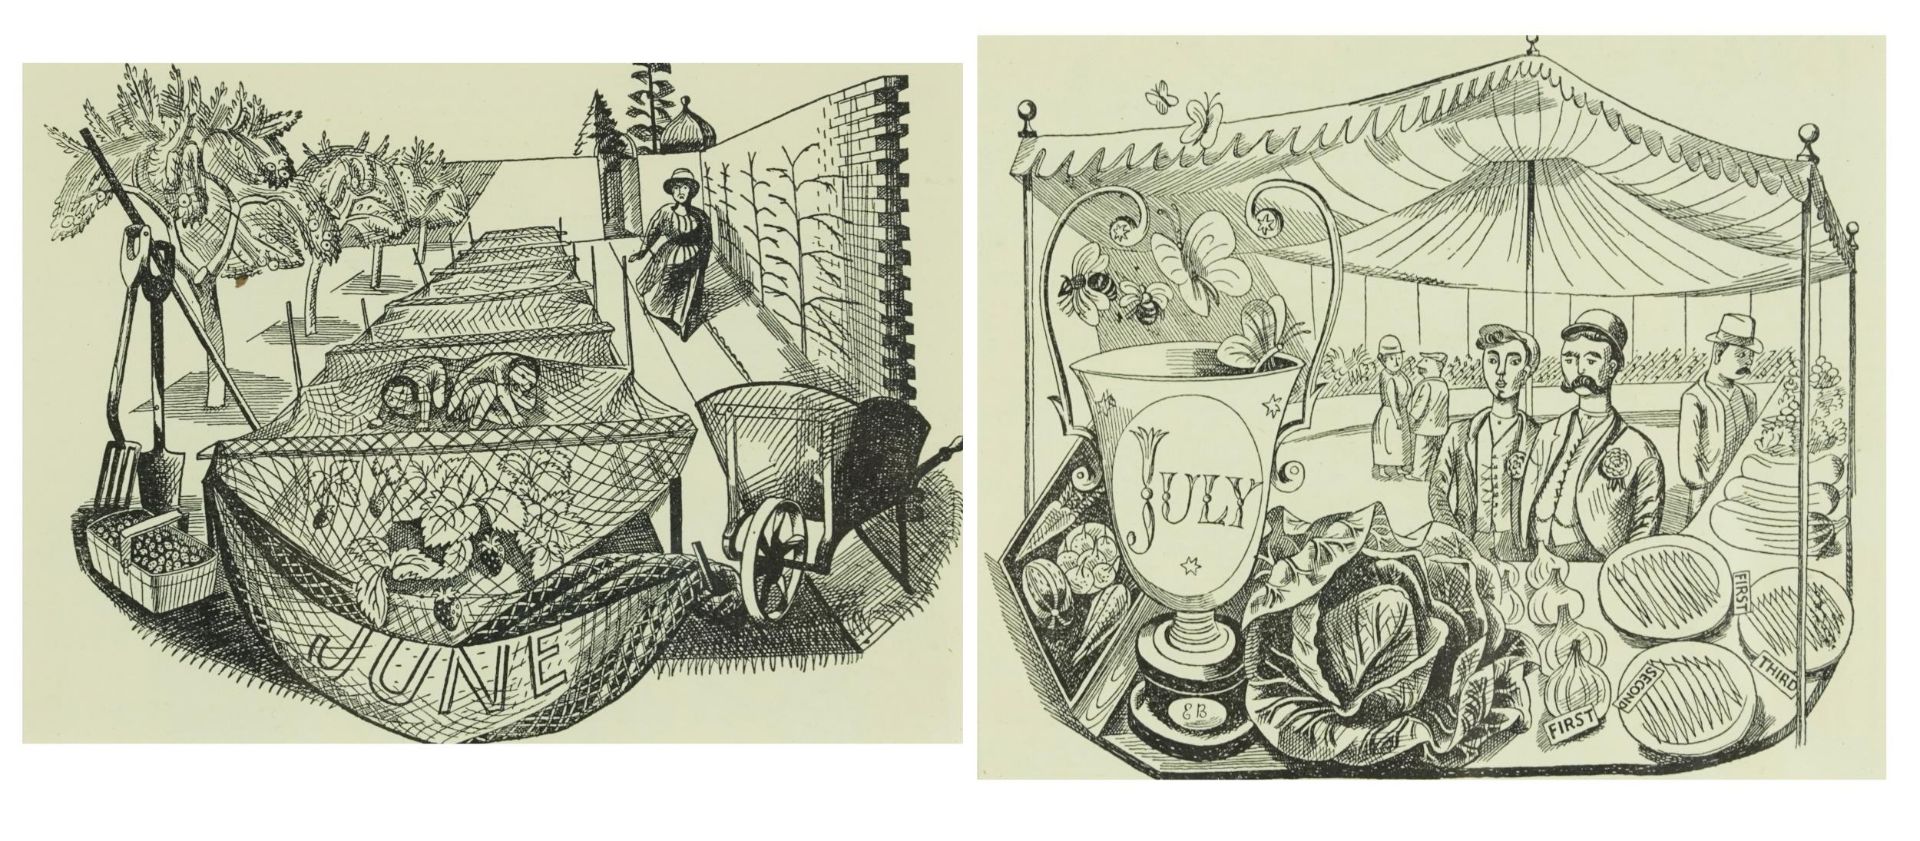 Edward Bawden - June and July, two lithographic prints, published in Signature 3, each inscribed